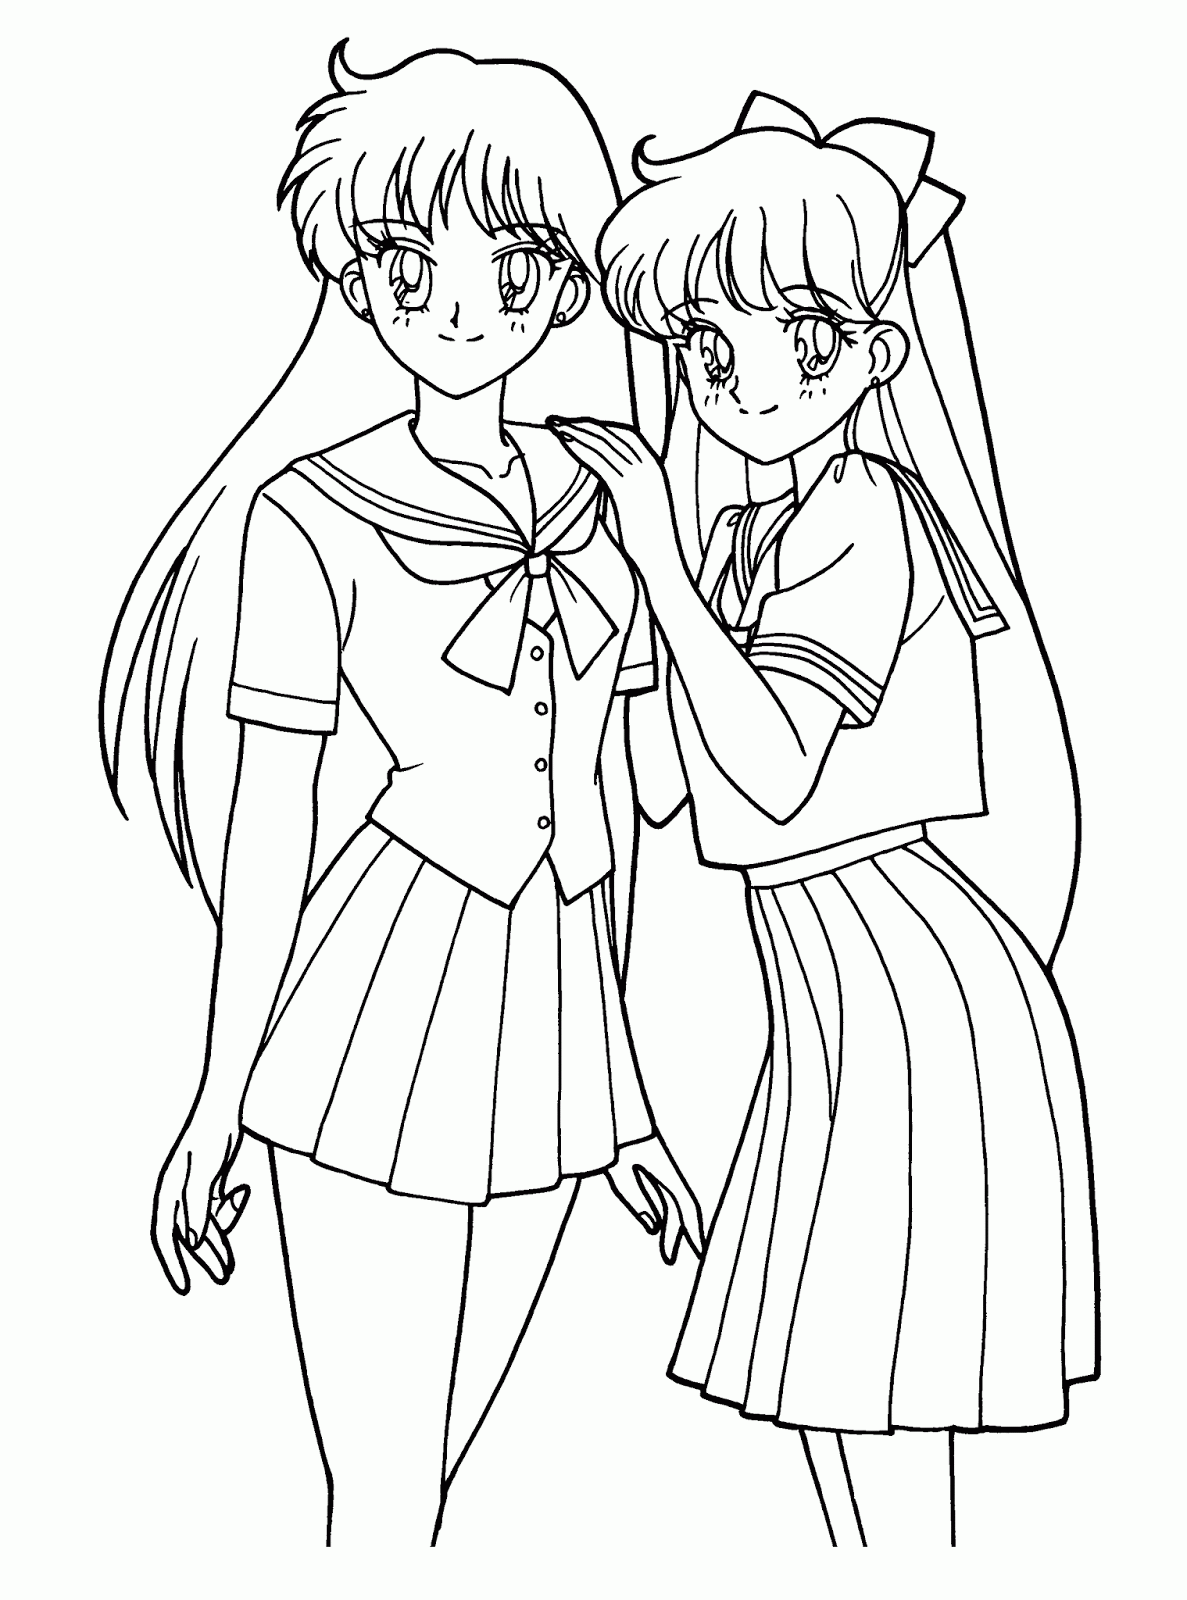 anime girl coloring sheets coloring pages anime coloring pages free and printable girl sheets coloring anime 